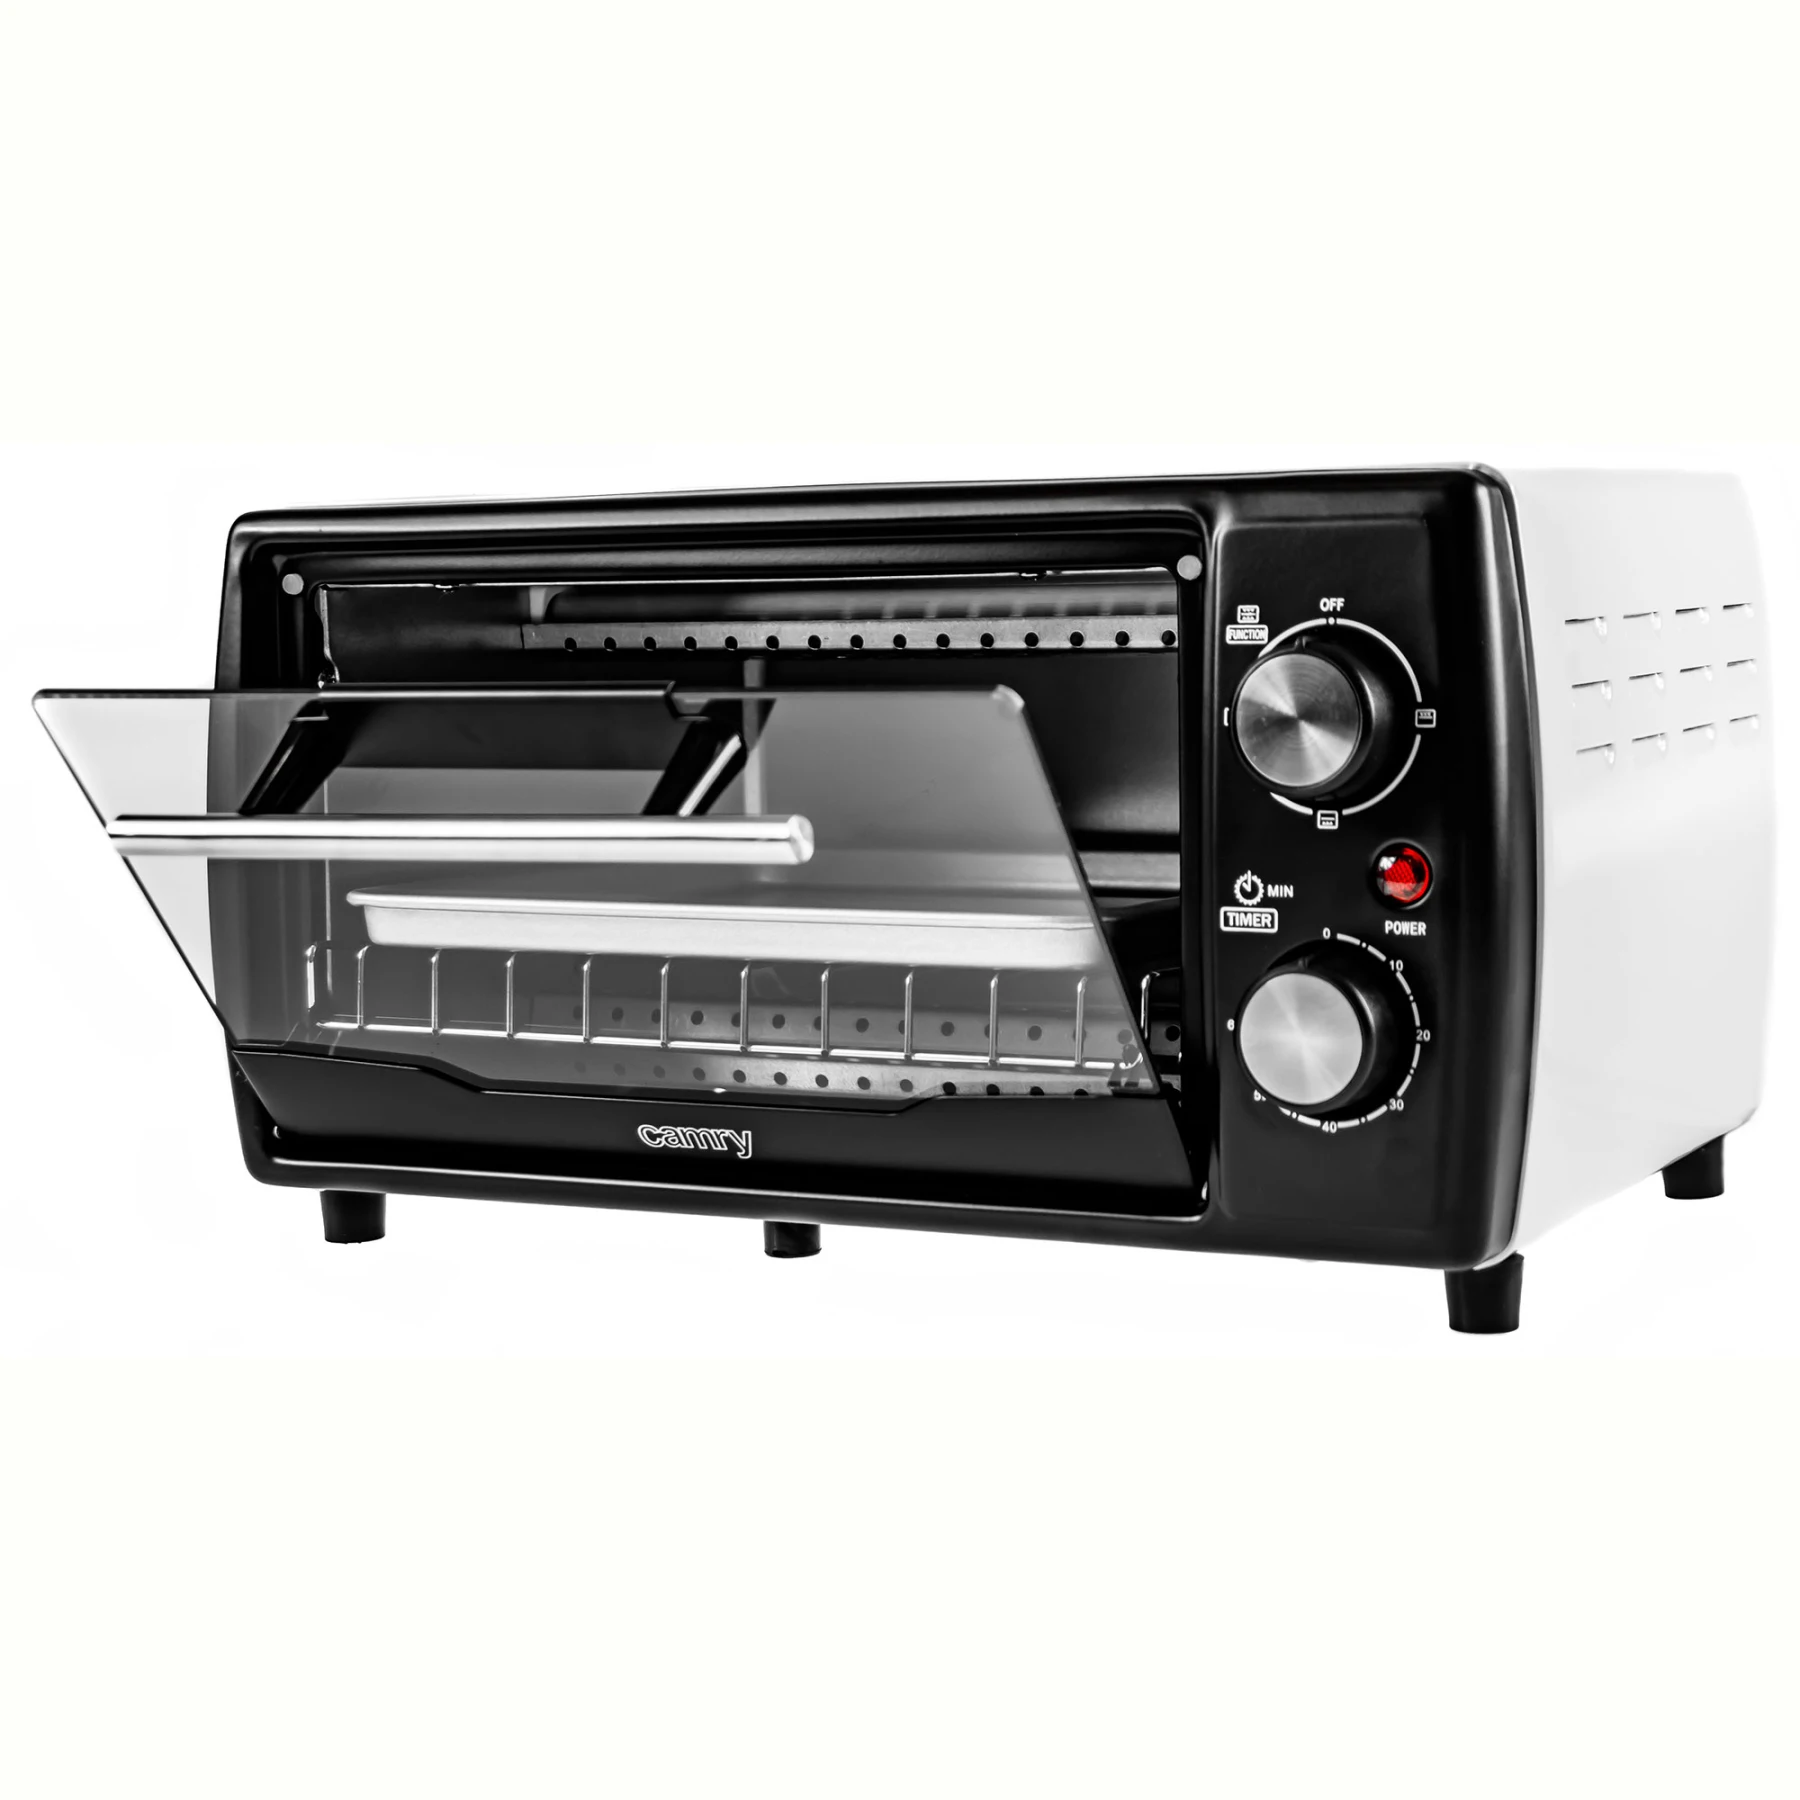 12L Mini Oven,Electric Cooker and Grill Home Baking Small Oven Timer Double  Glass Door Top and Bottom Convection Countertop Toaster Oven (White)